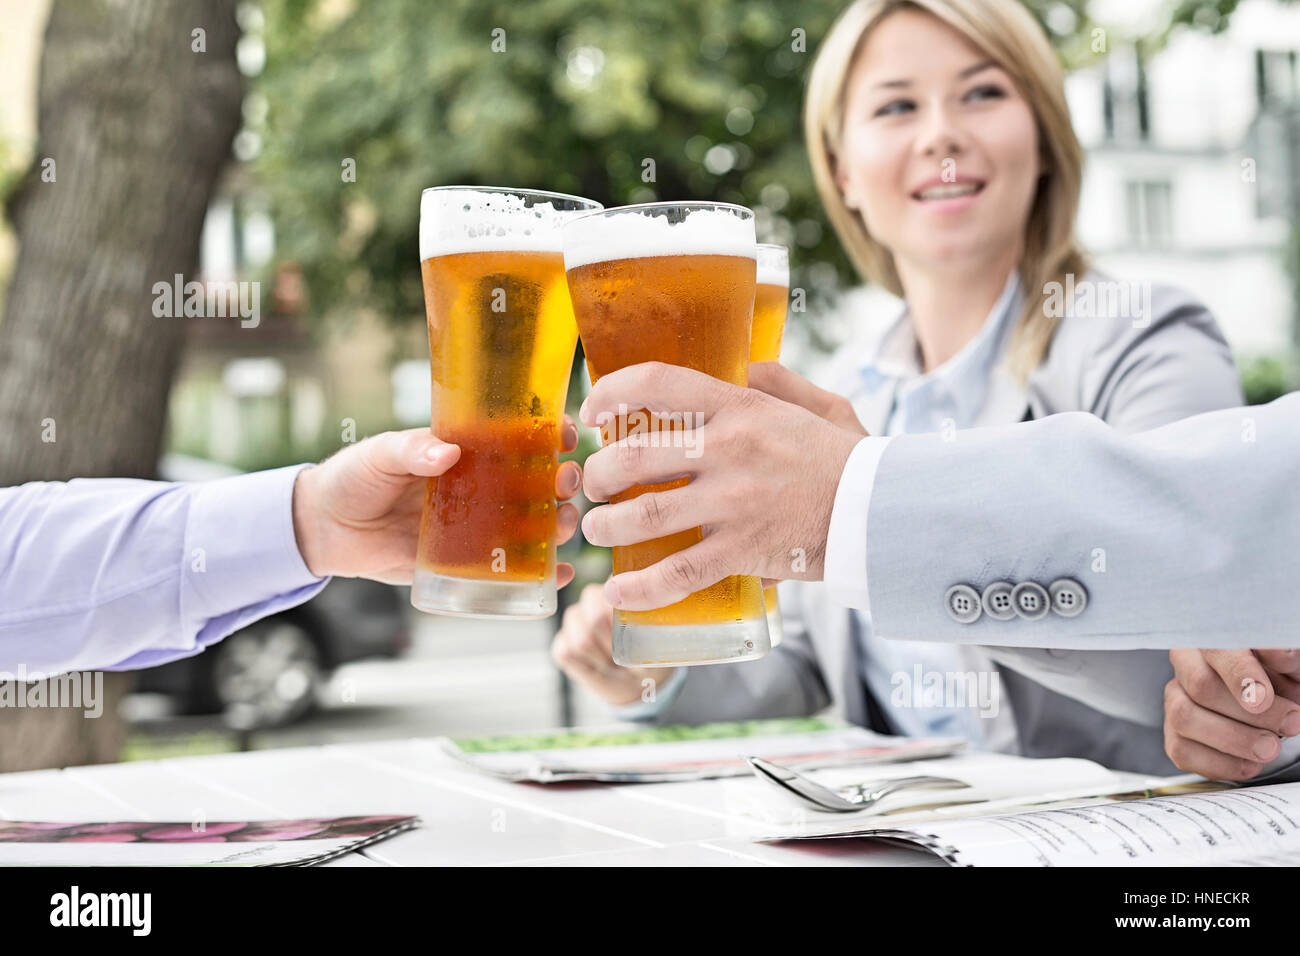 Businesspeople toasting beer glasses at outdoor restaurant Stock Photo